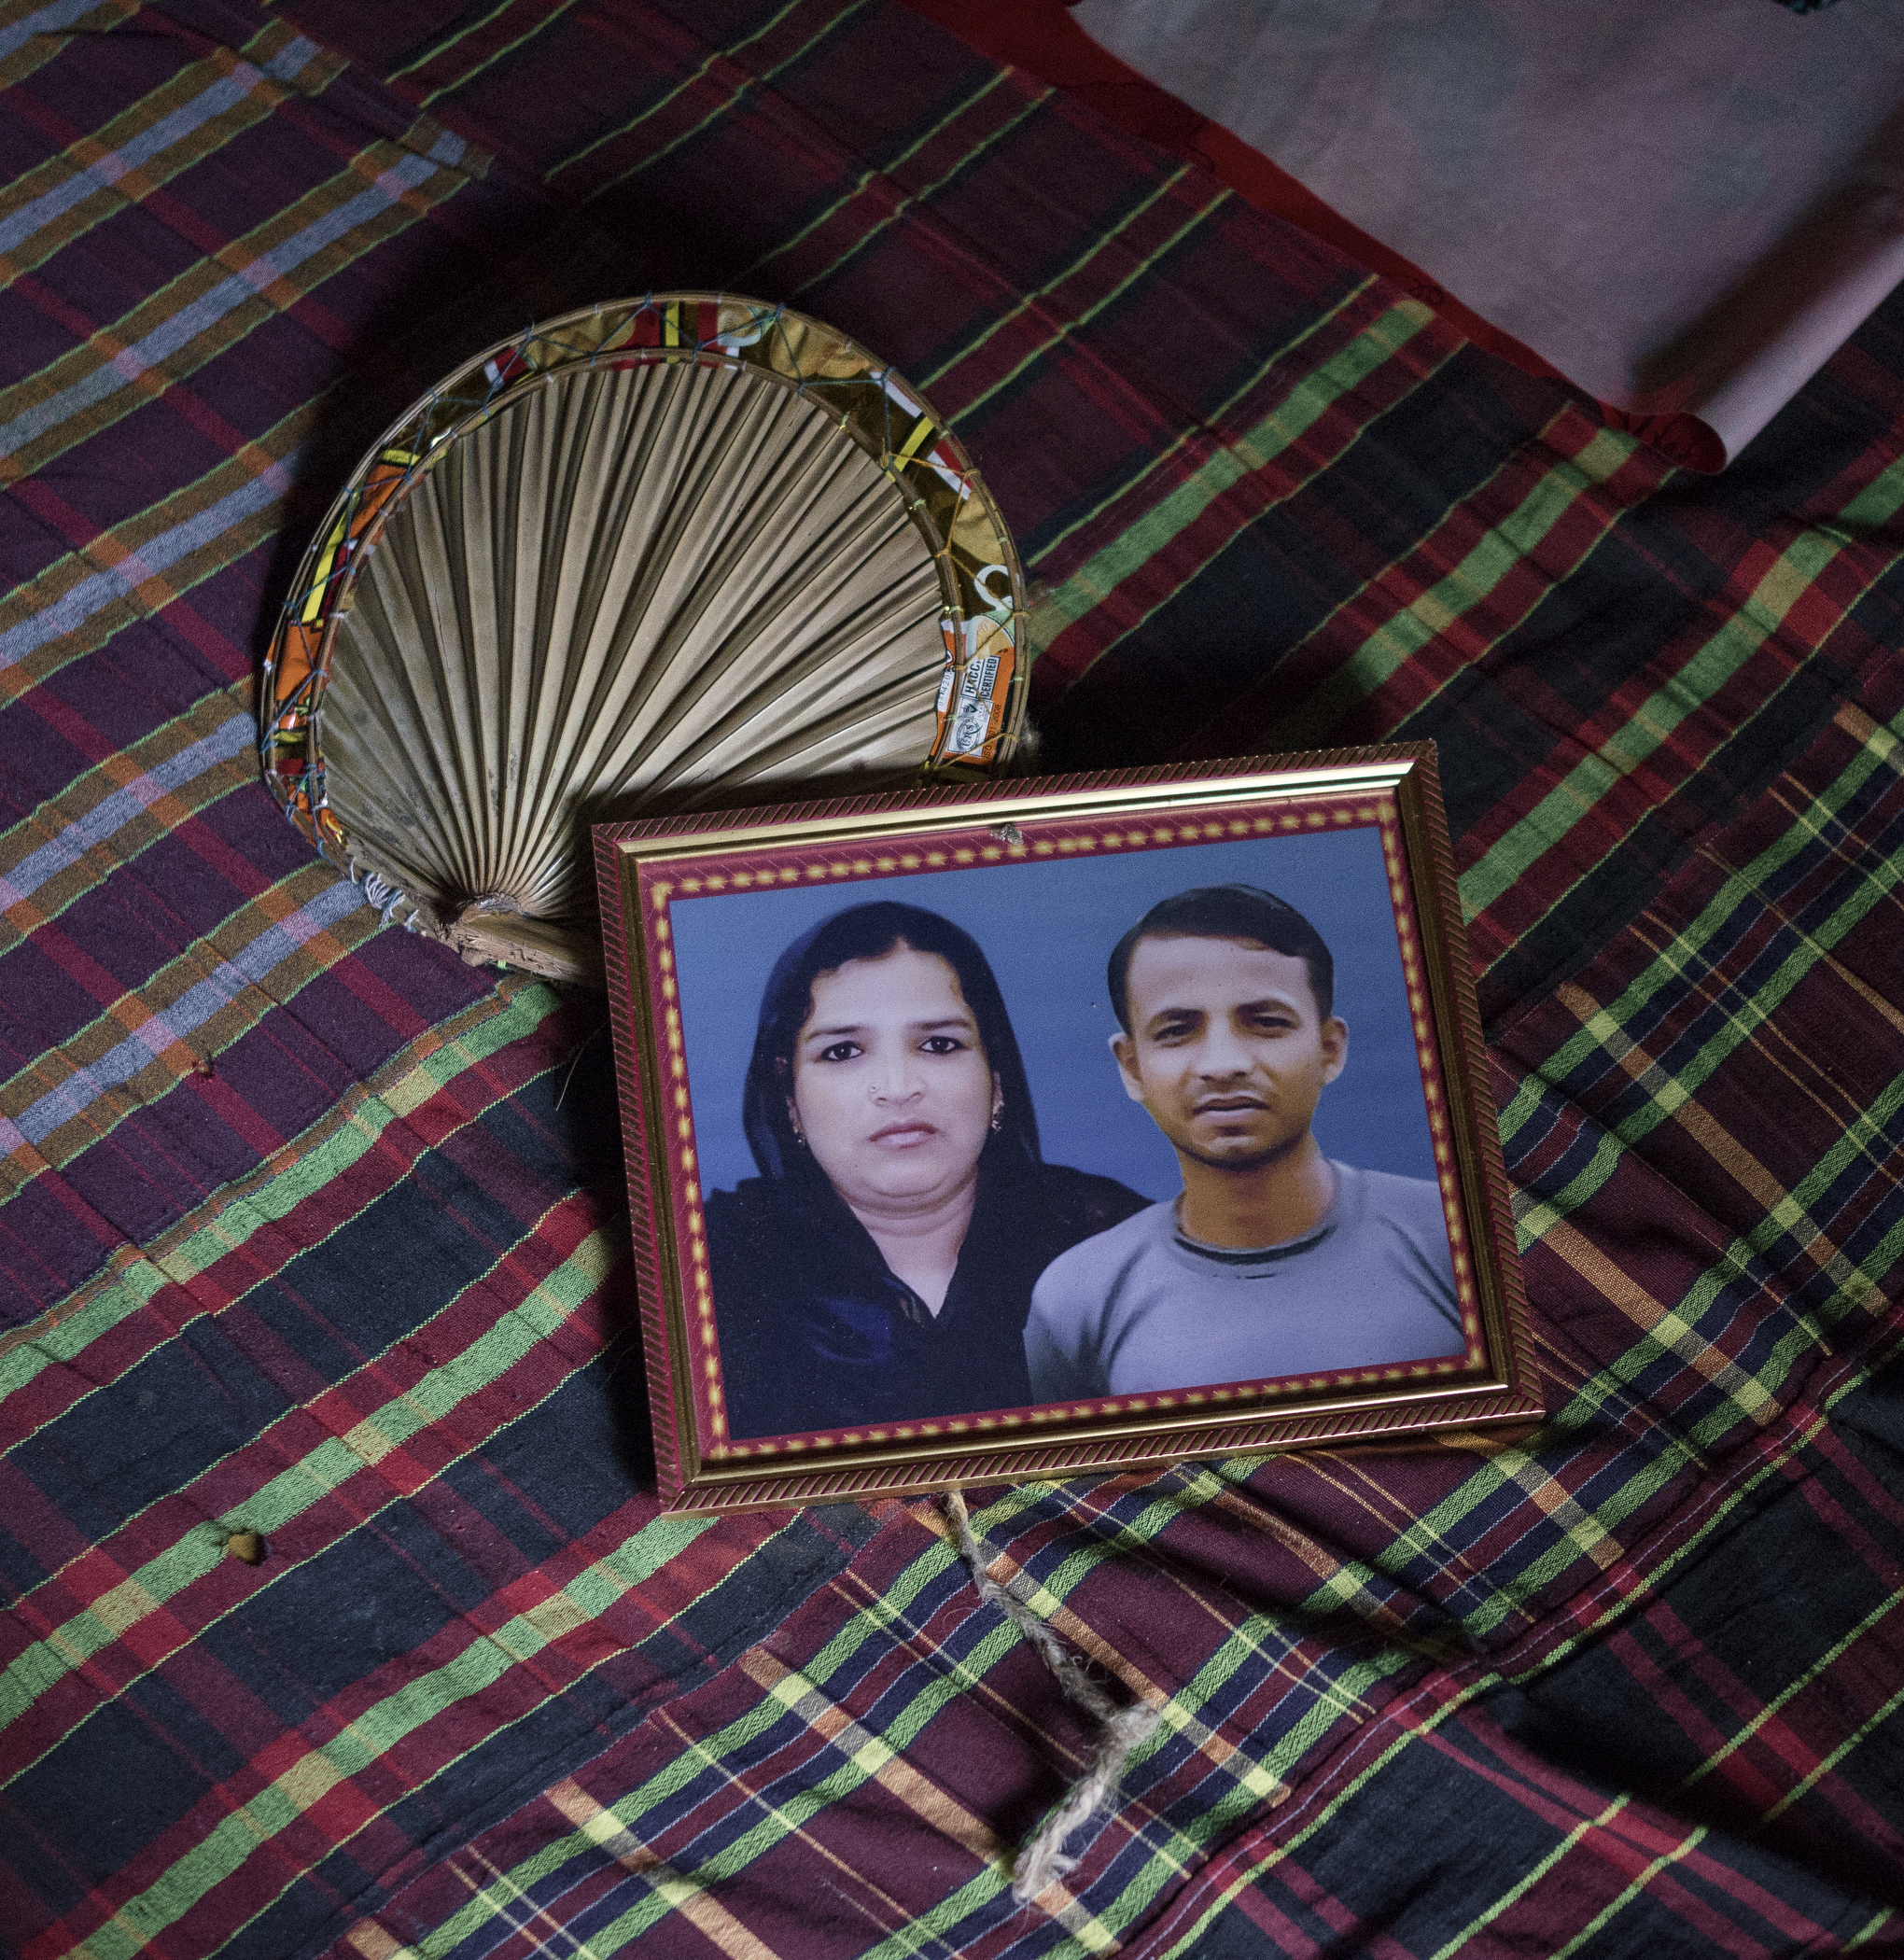 Nazma’s picture with her son becomes only a memory as the disaster claimed her life.